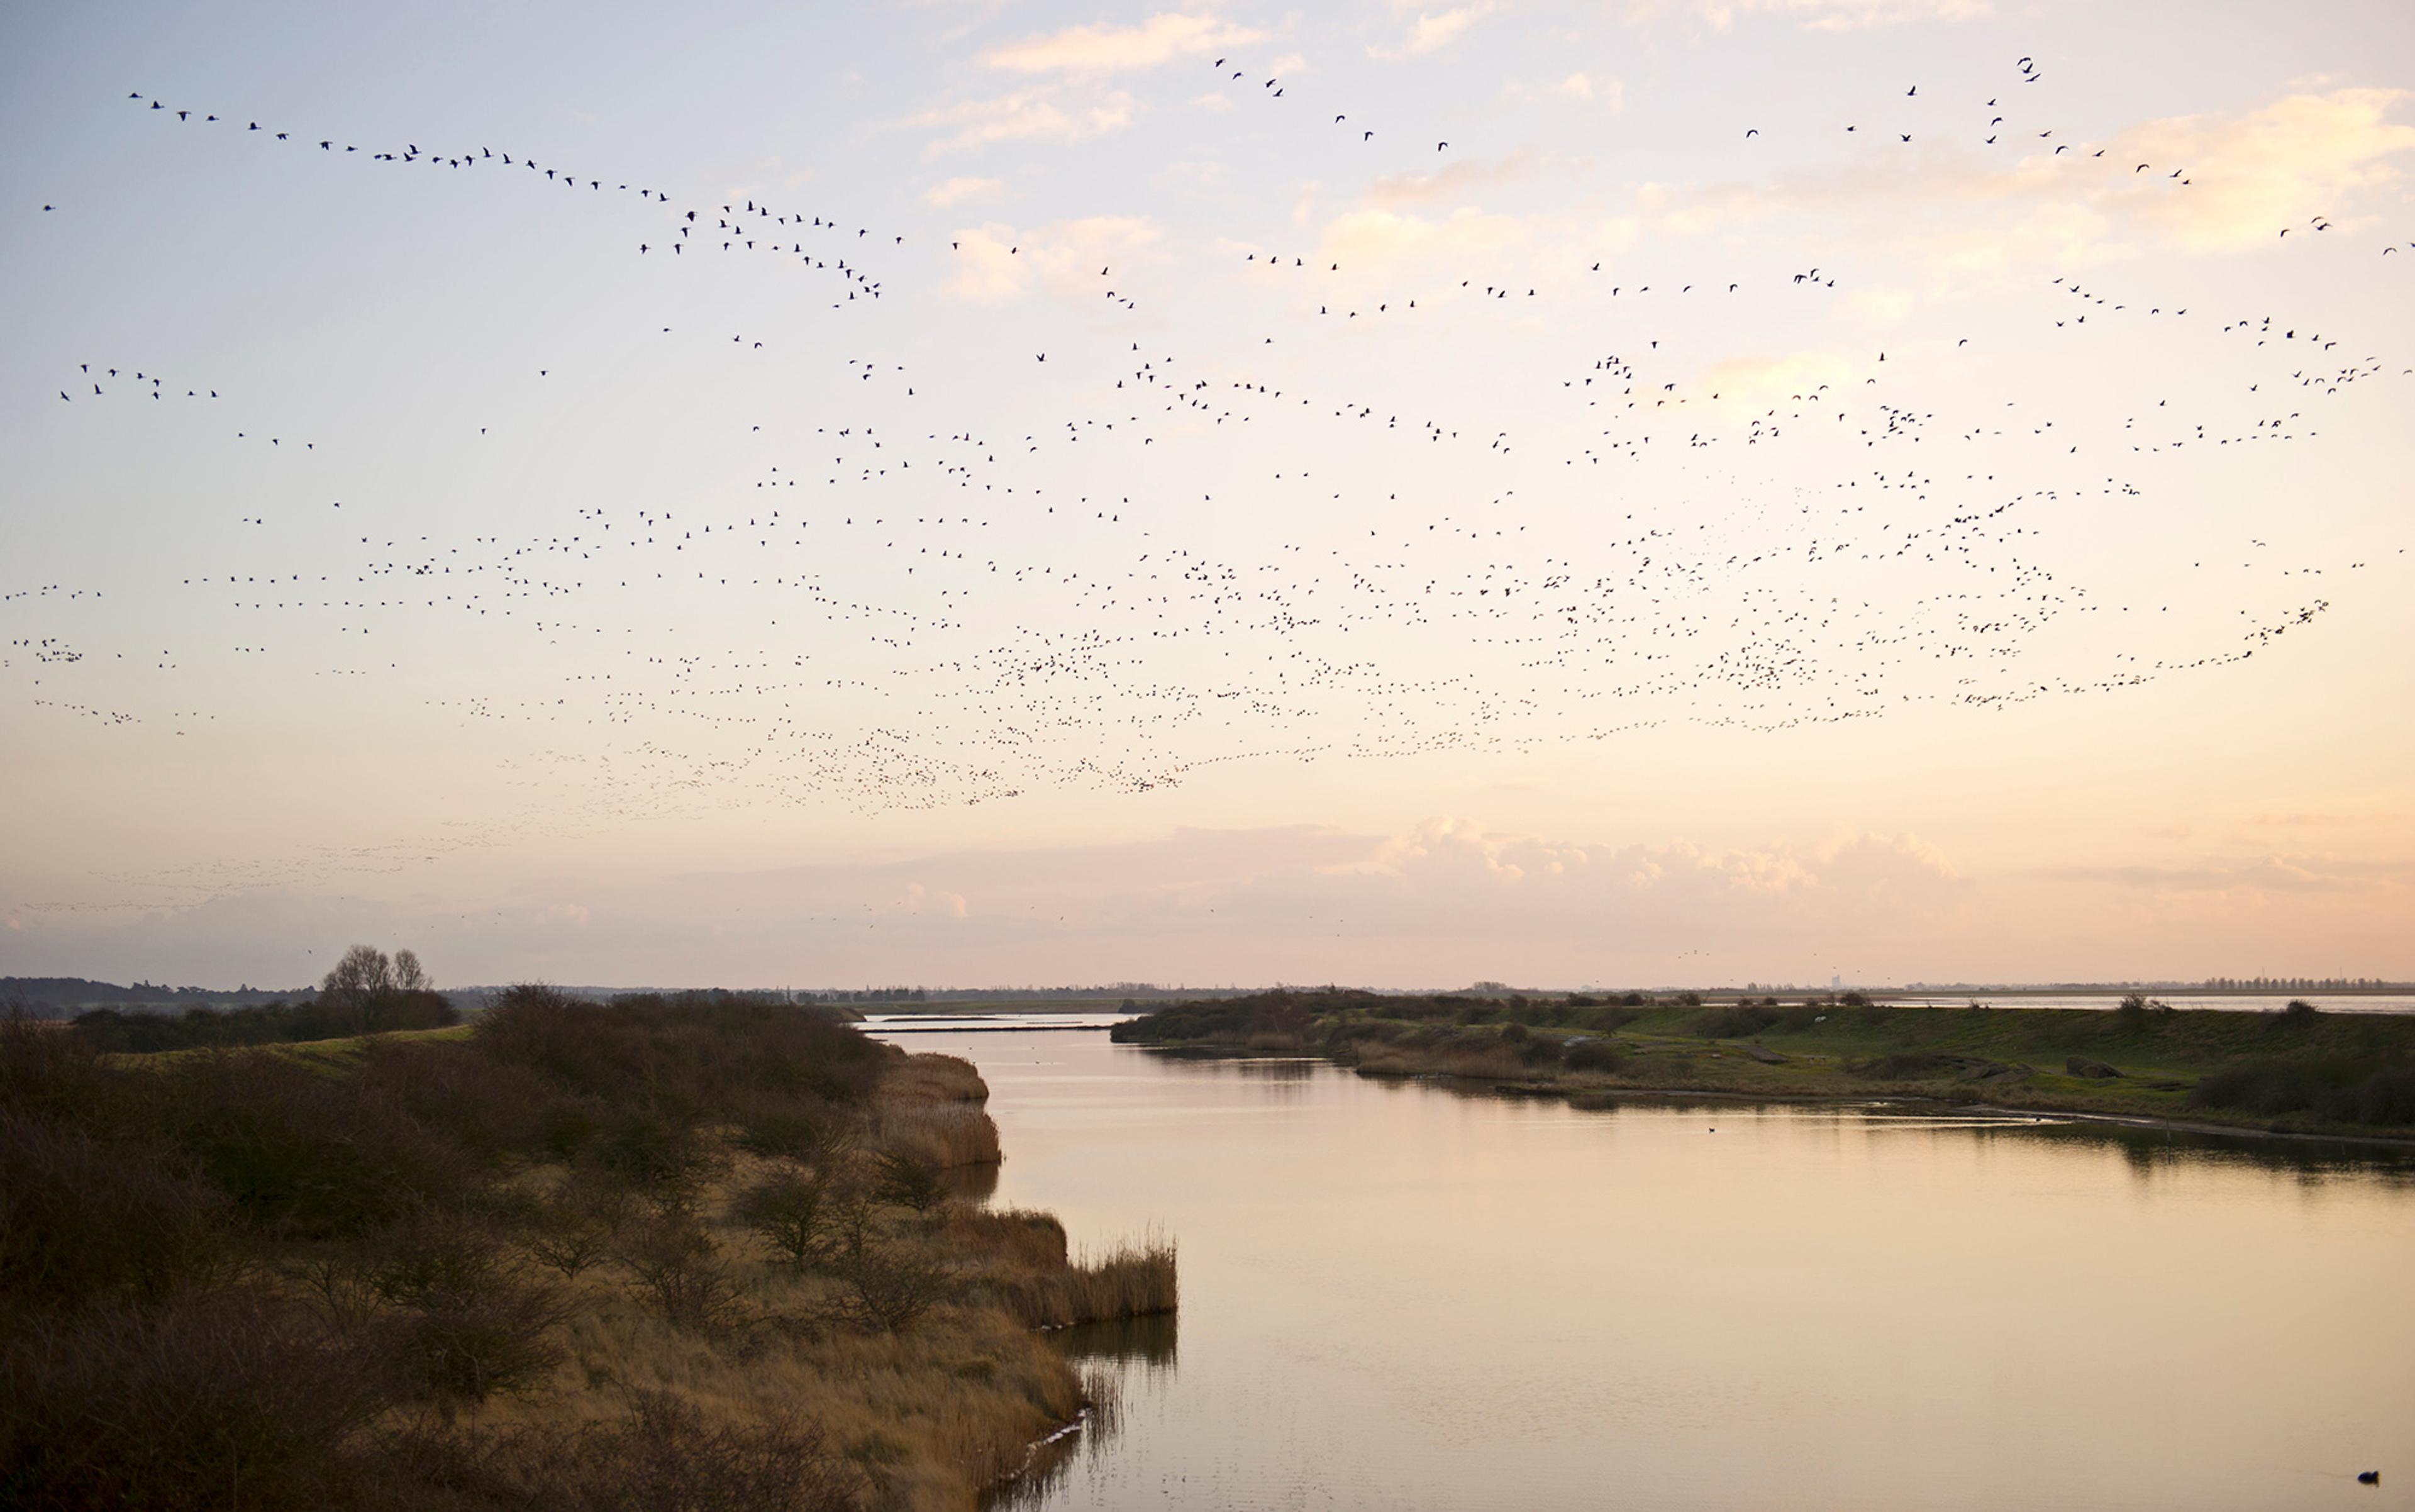 A flock of birds fly over a wide expanse of marshland and a river at dusk.